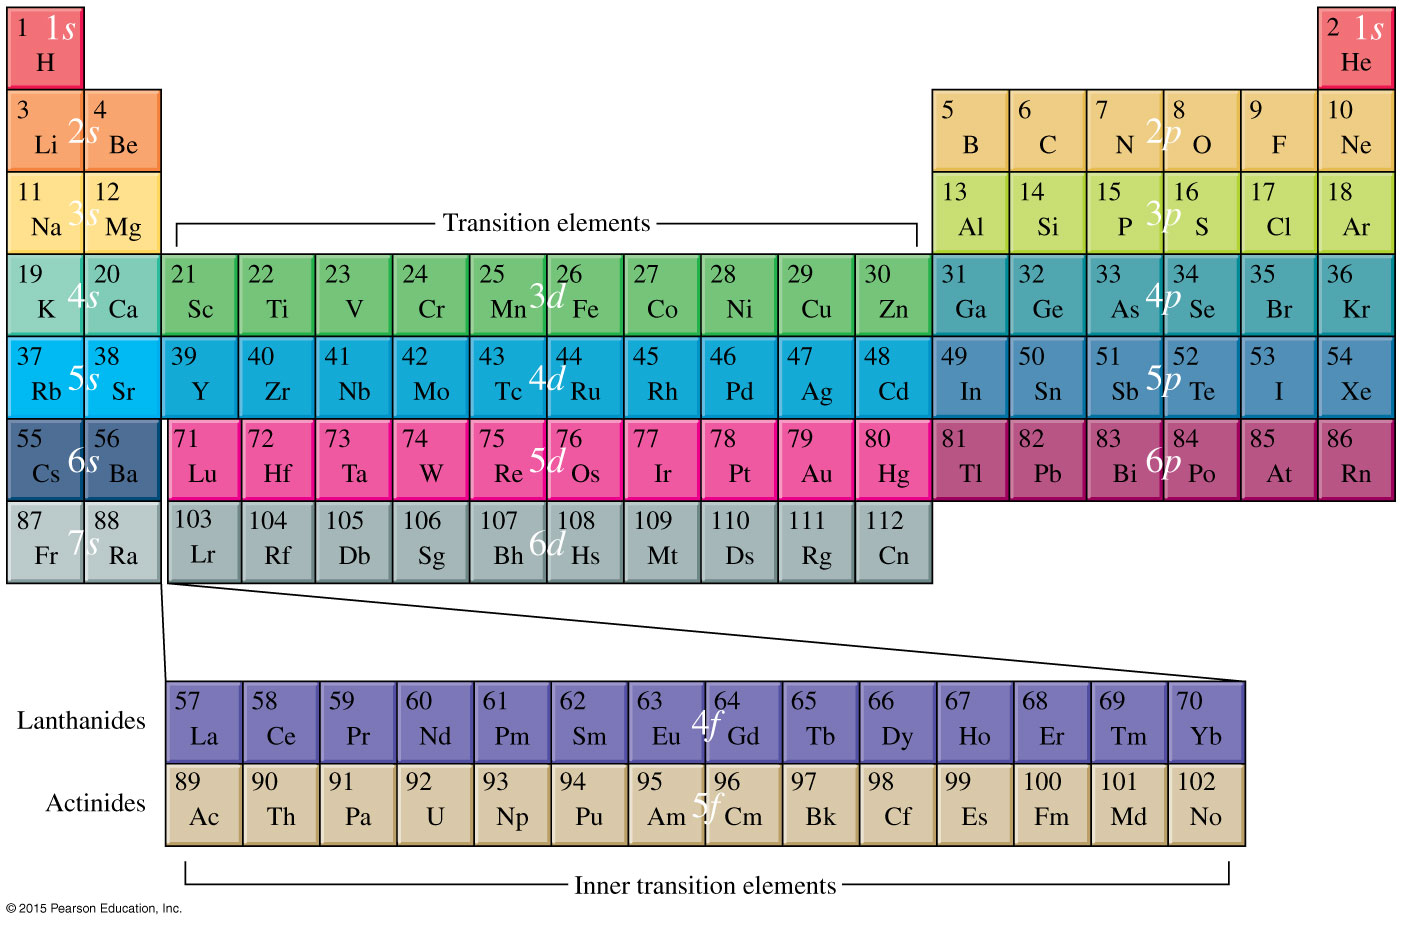 Download Solved: Why Is The Section Of The Periodic Table Labeled A ...